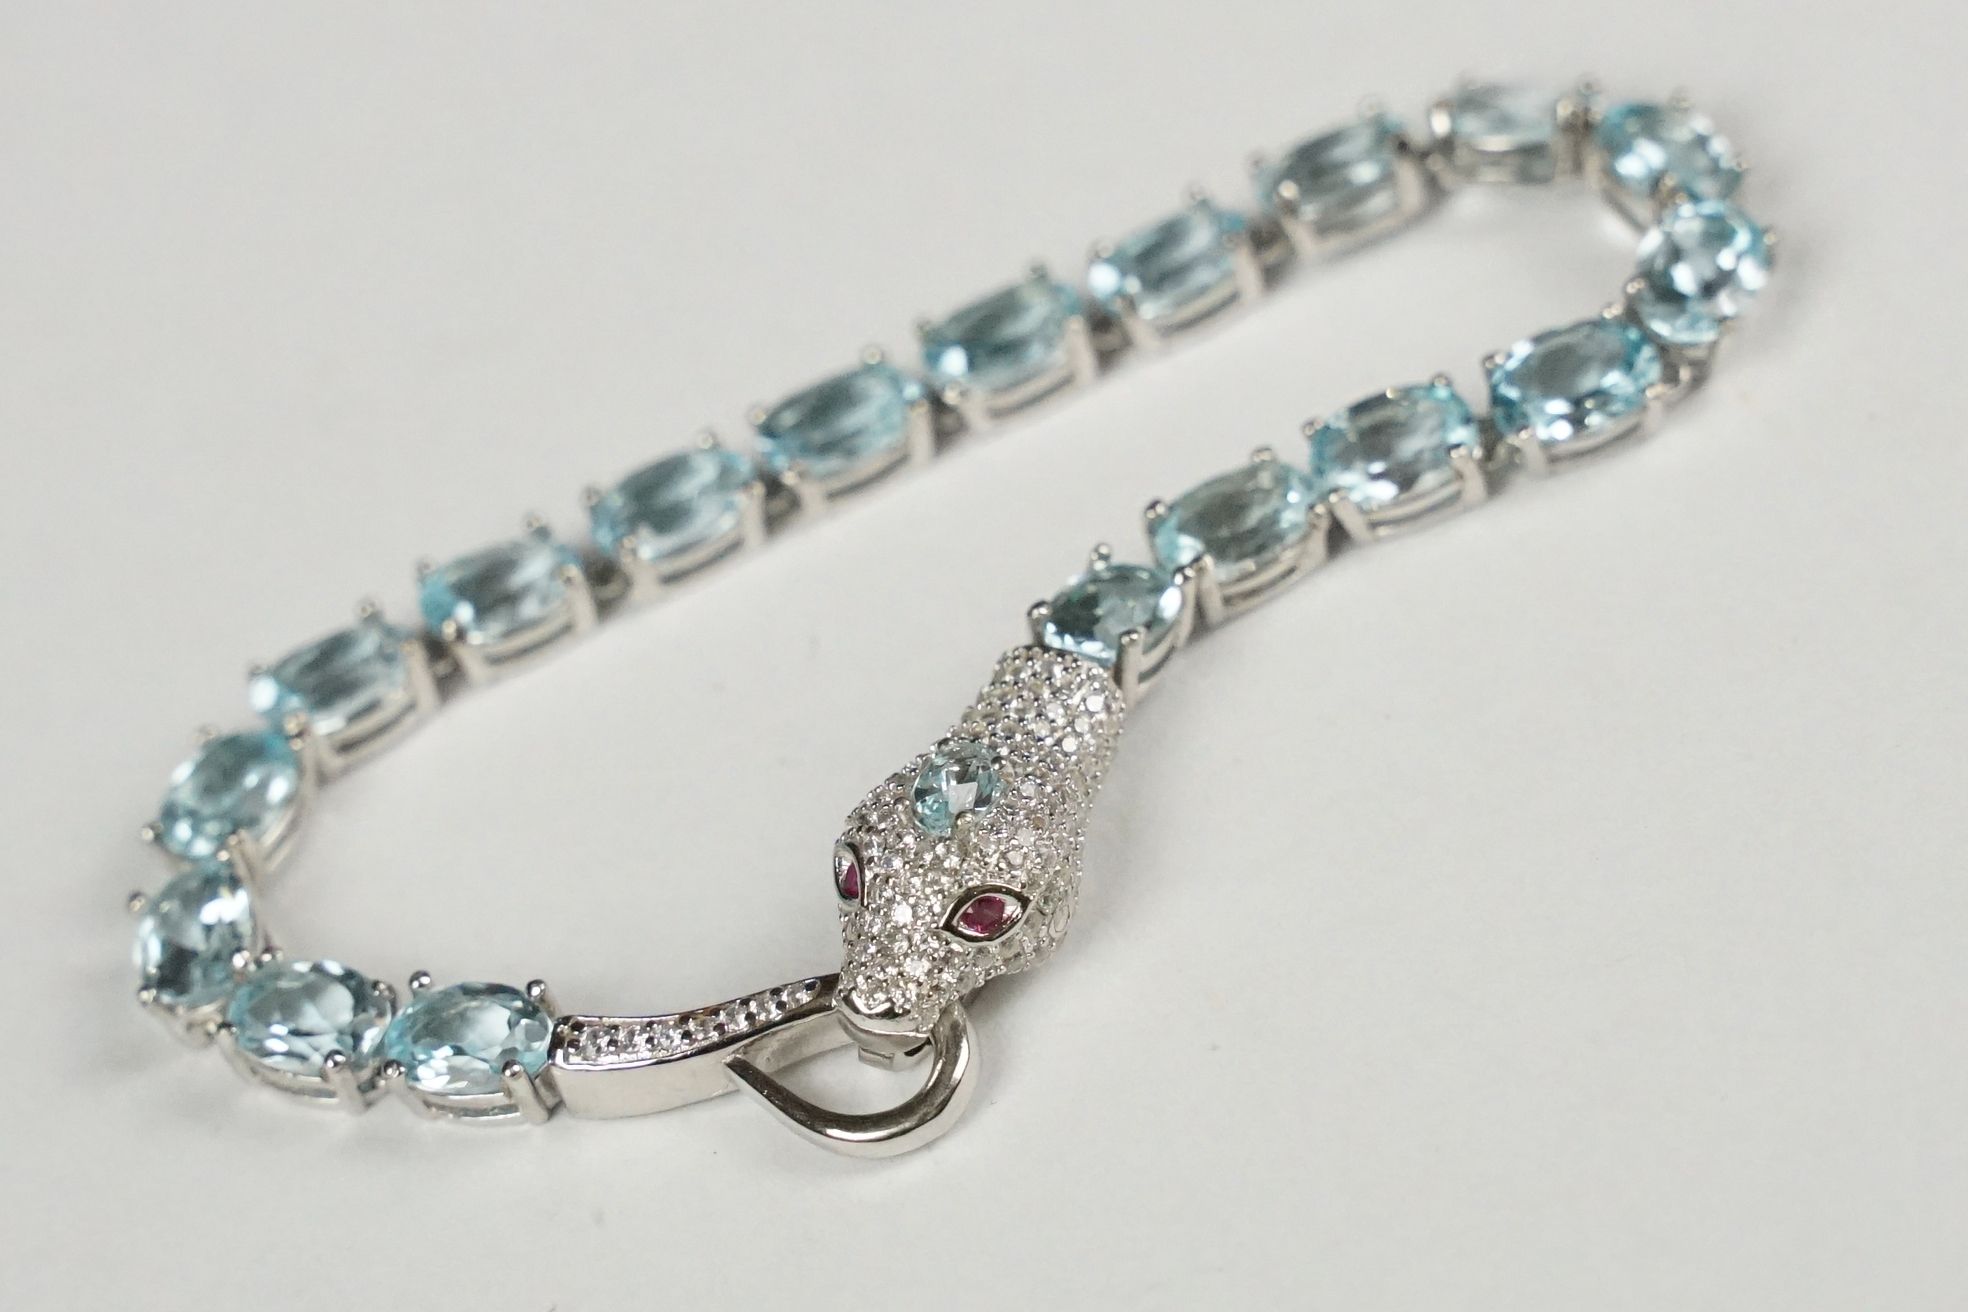 Silver and aquamarine bracelet with snake head clasp